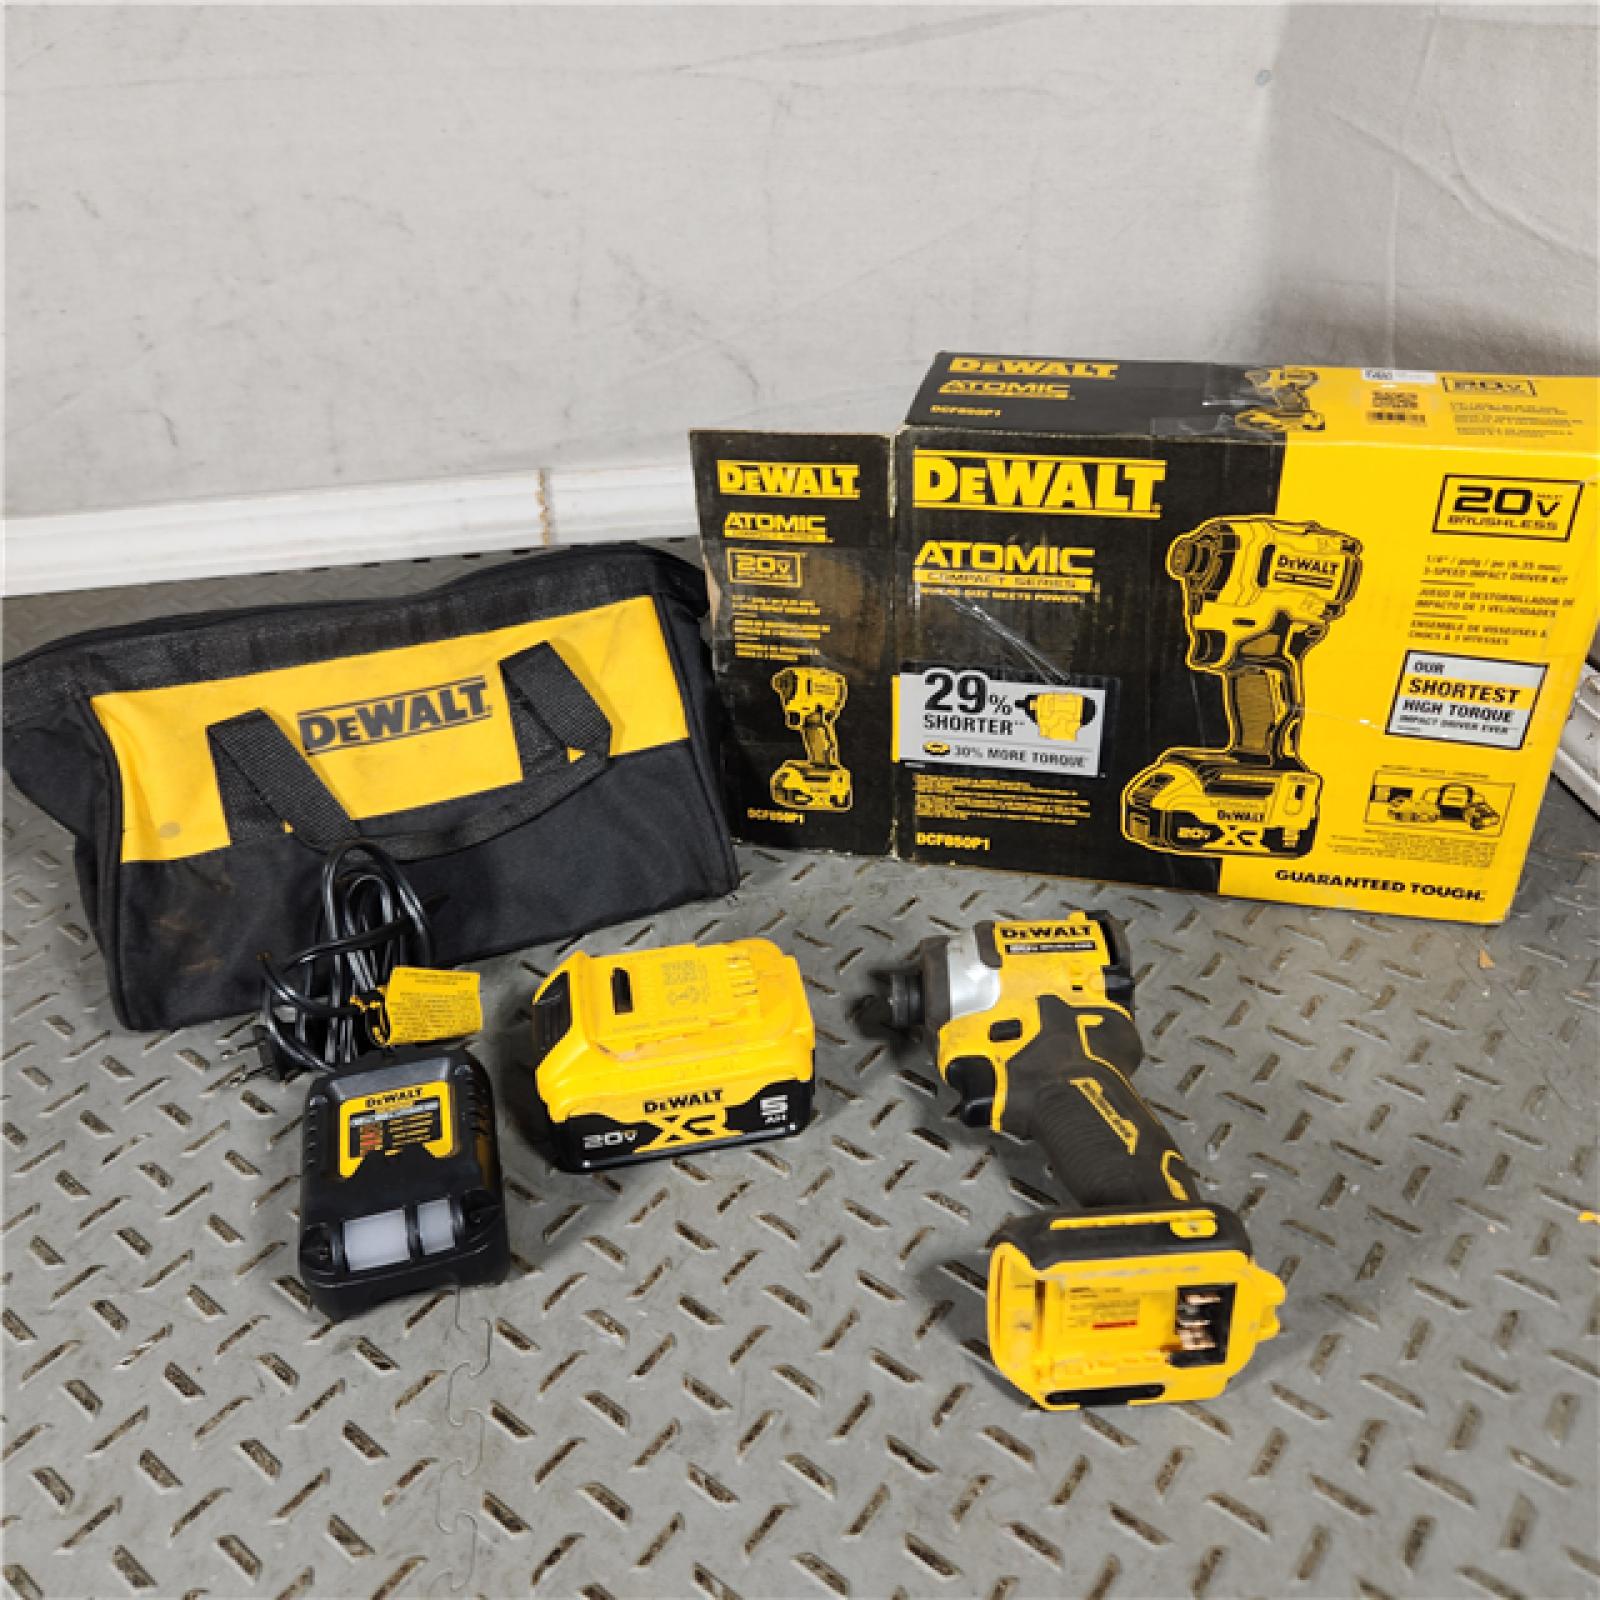 Houston Location - AS-IS DEWALT DCF850P1 ATOMIC 20V MAX Lithium-Ion Brushless Cordless 3-Speed 1/4 Impact Driver Kit 5.0Ah - Appears IN Used Condition